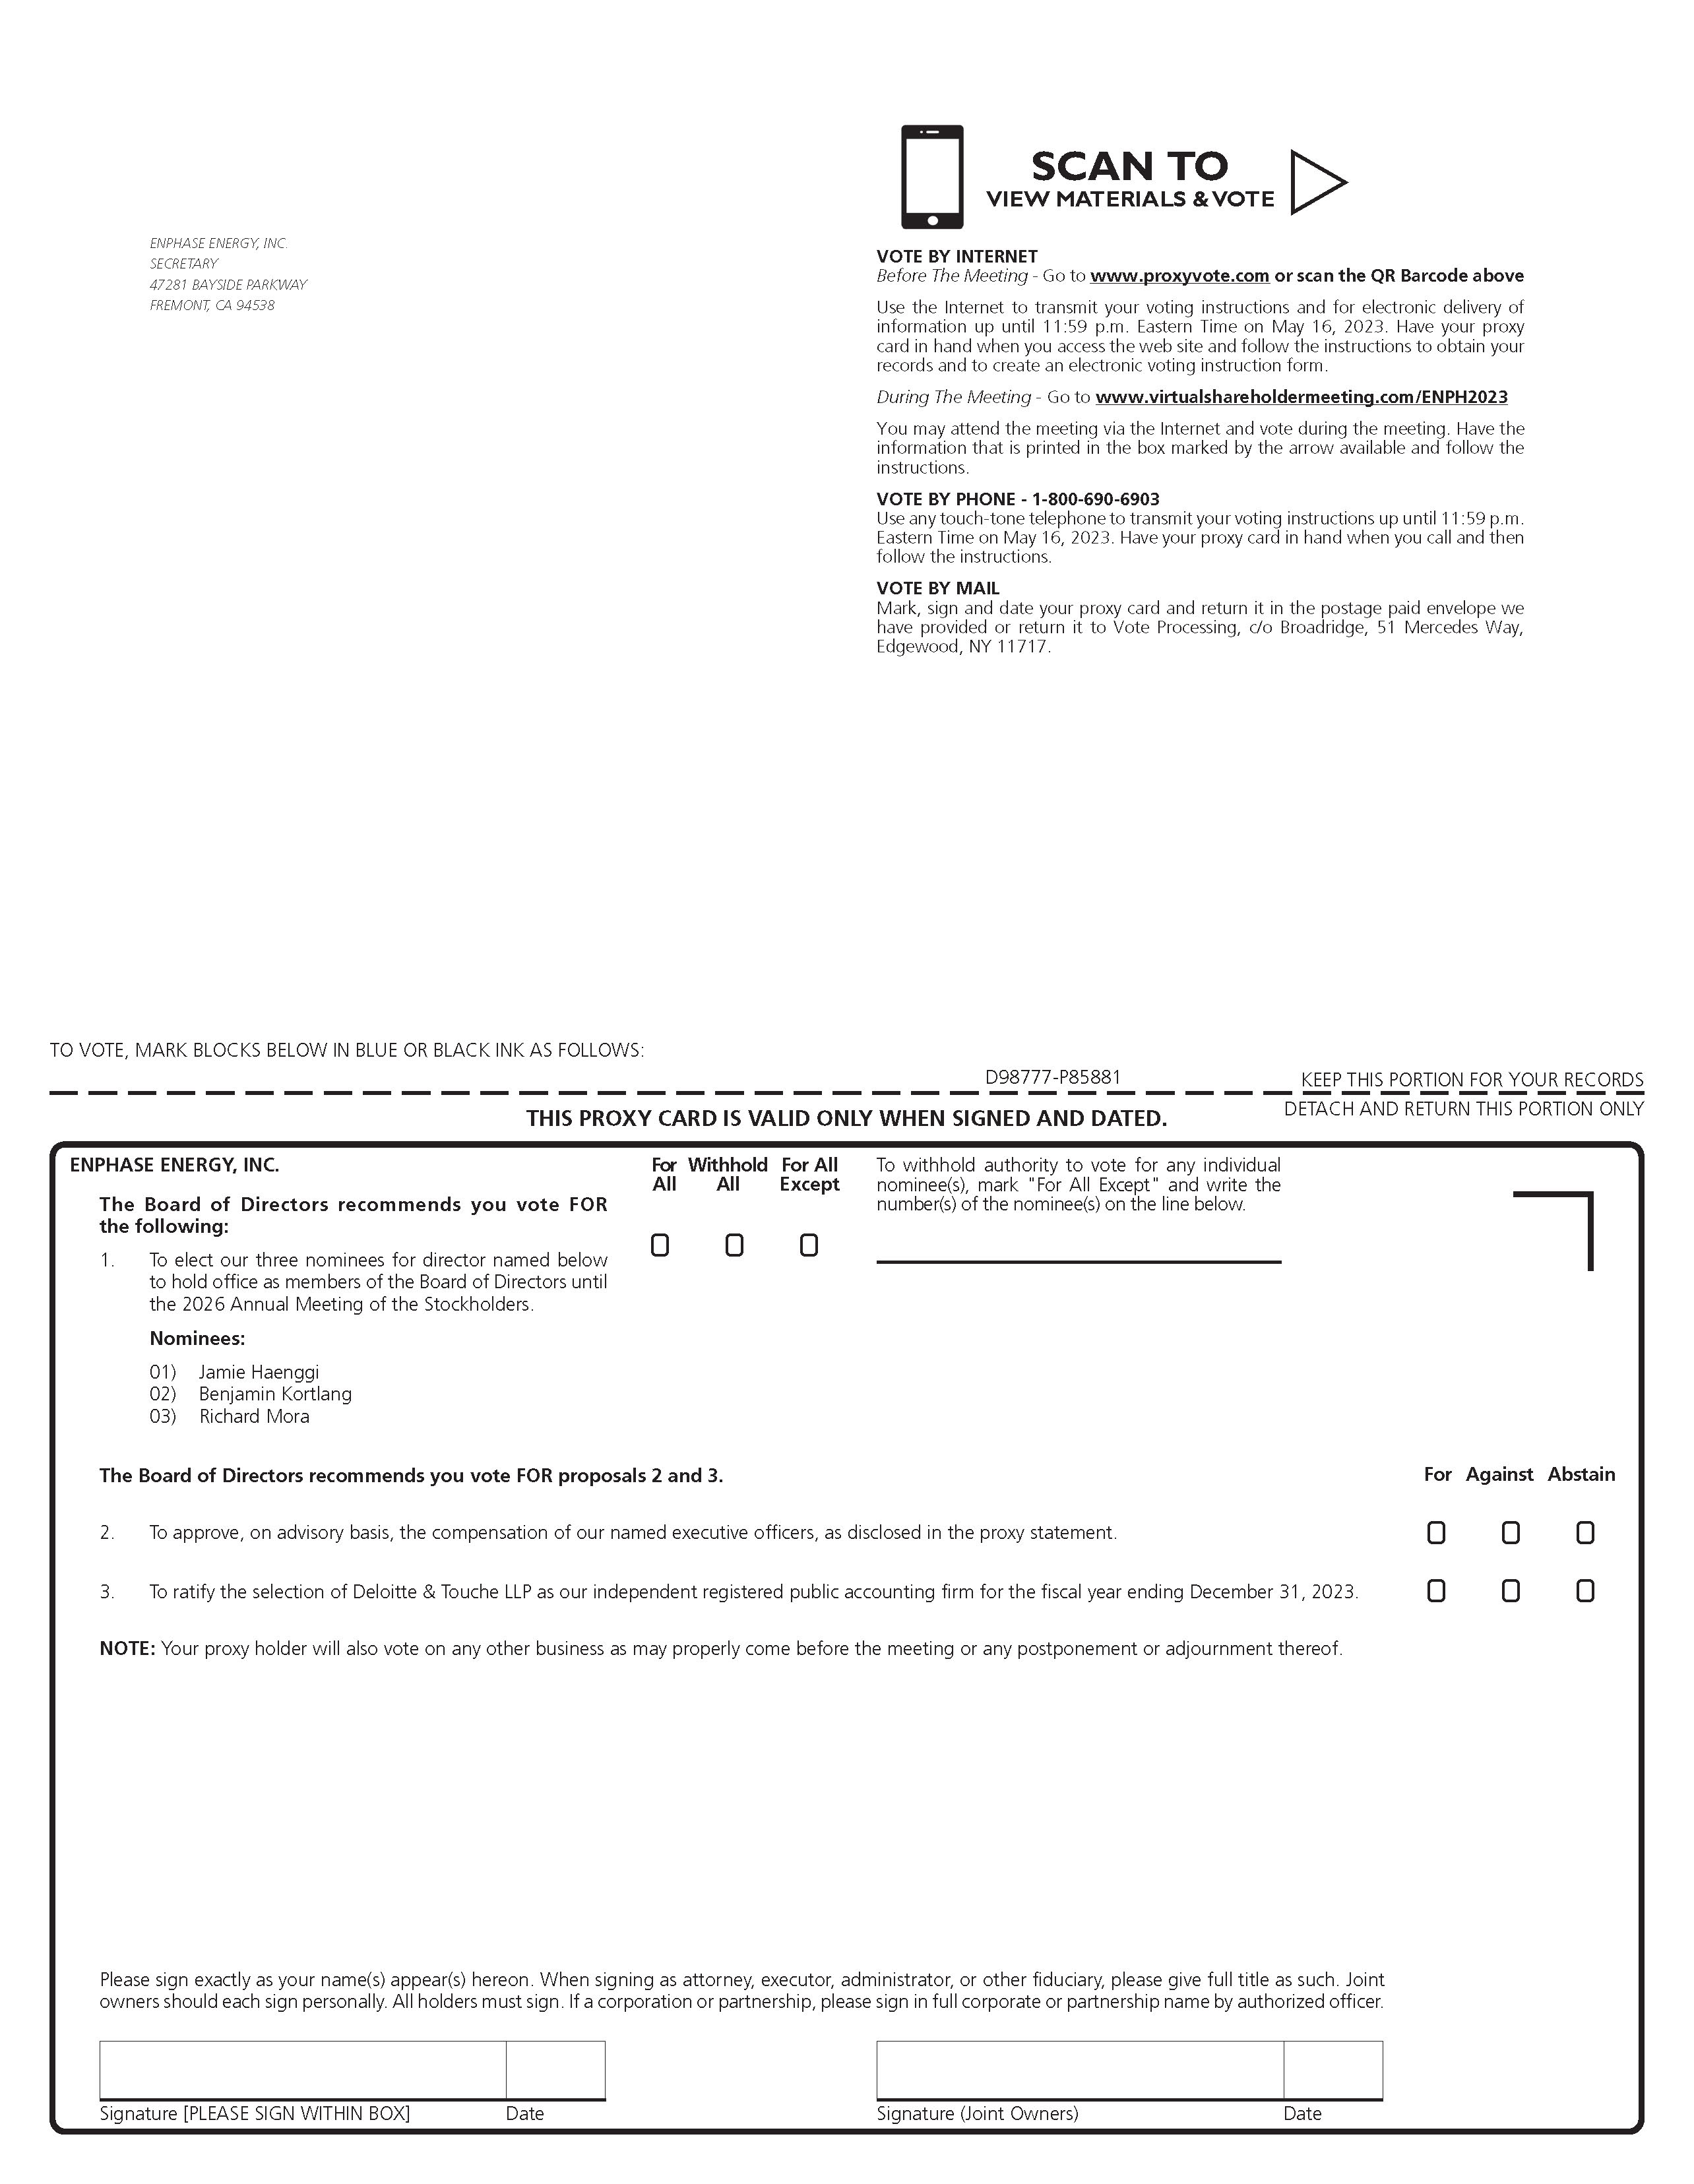 ENPHASE ENERGY INC._V_PRXY_GT20_P85881_23(#67757) - FINAL (002)_Page_1.jpg